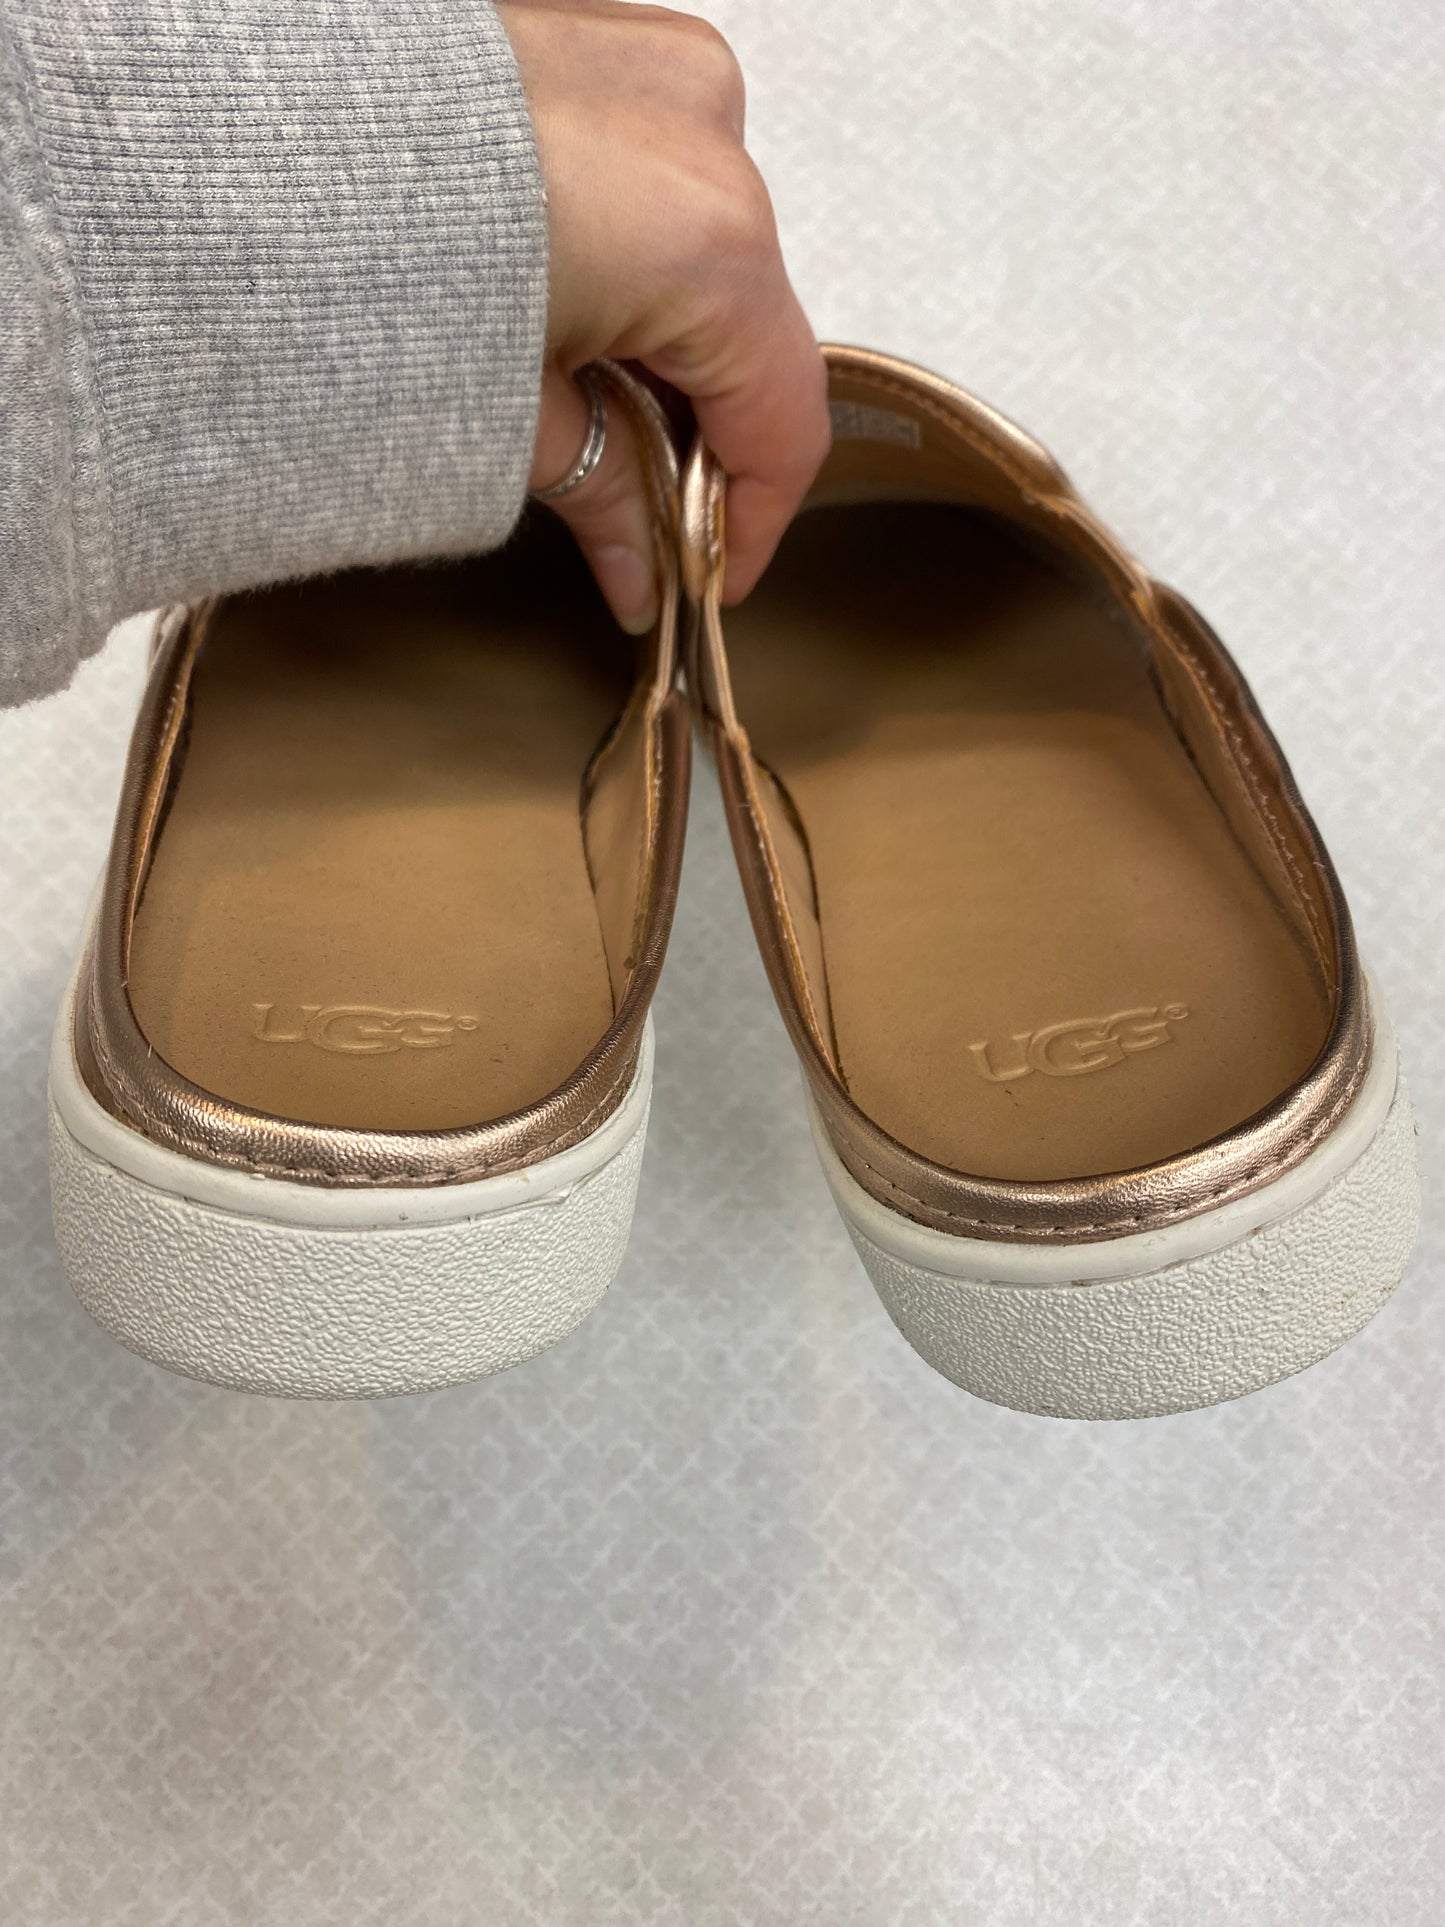 Shoes Flats Mule & Slide By Ugg  Size: 9